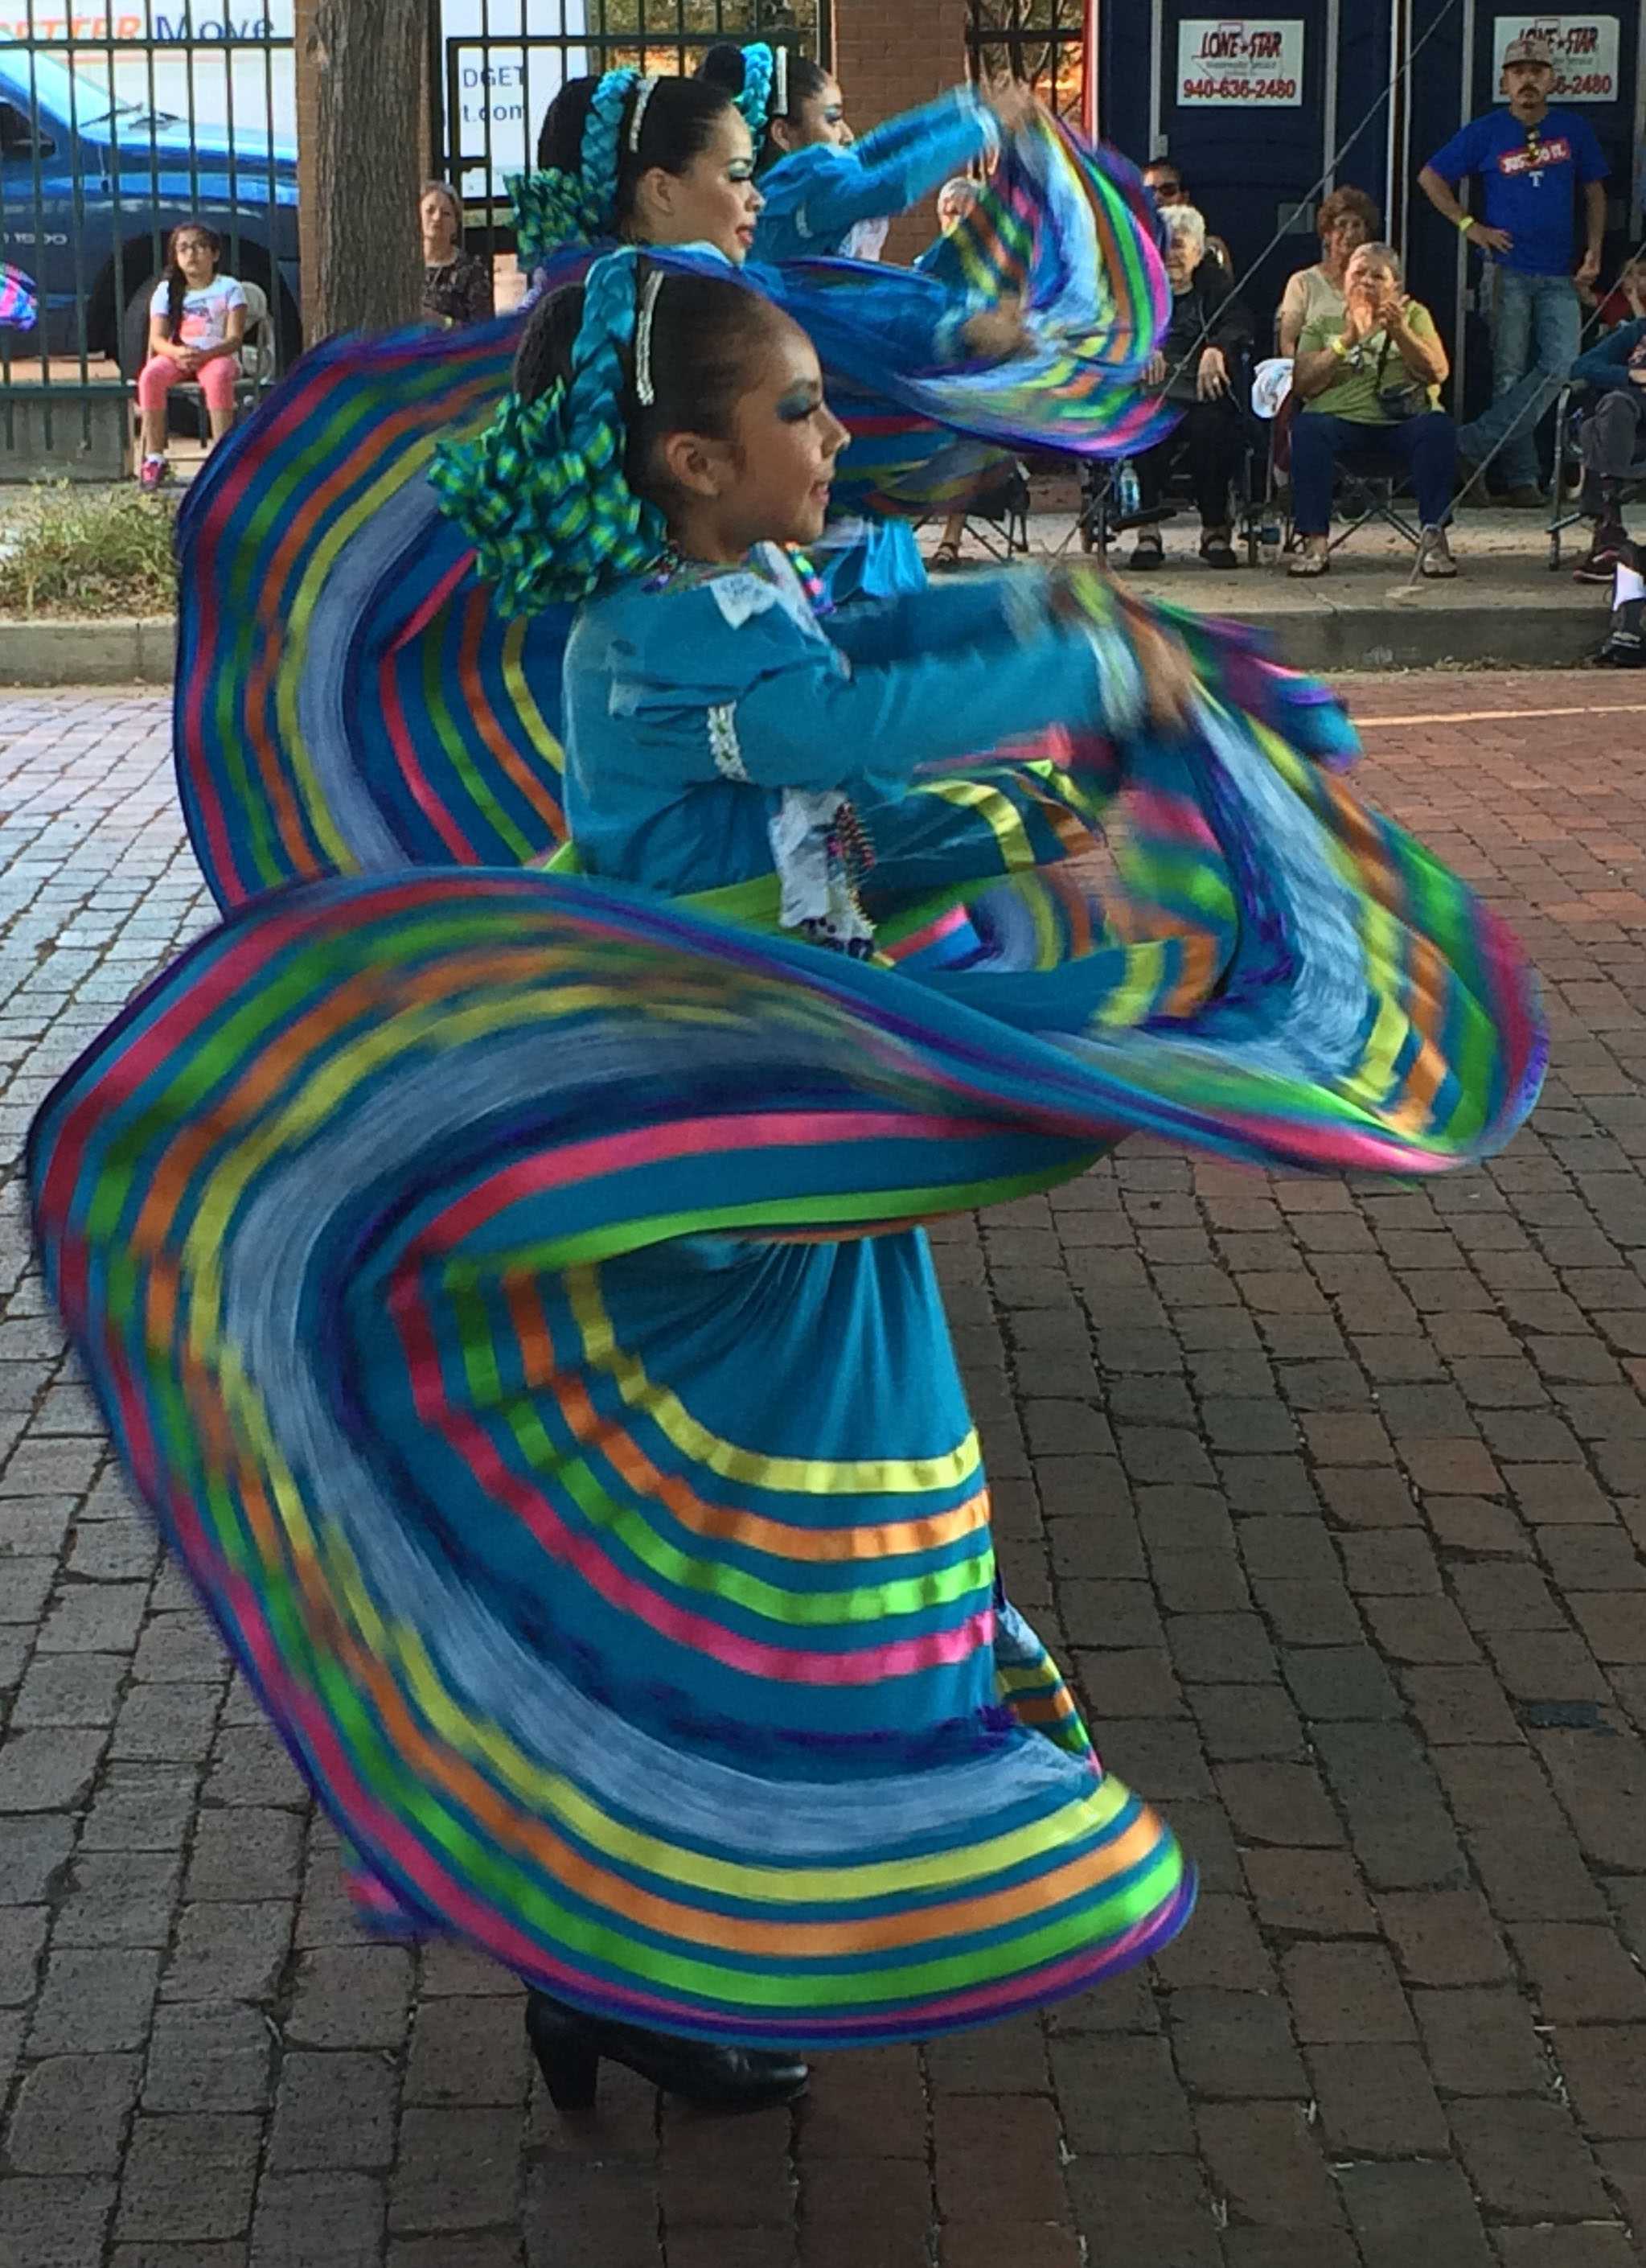 Members of Grupo Folklorico Faisan, a travelling group from California, perform at Calle Ocho on Oct. 1 at the downtown Farmer's Market. Photo by Emily Simmons